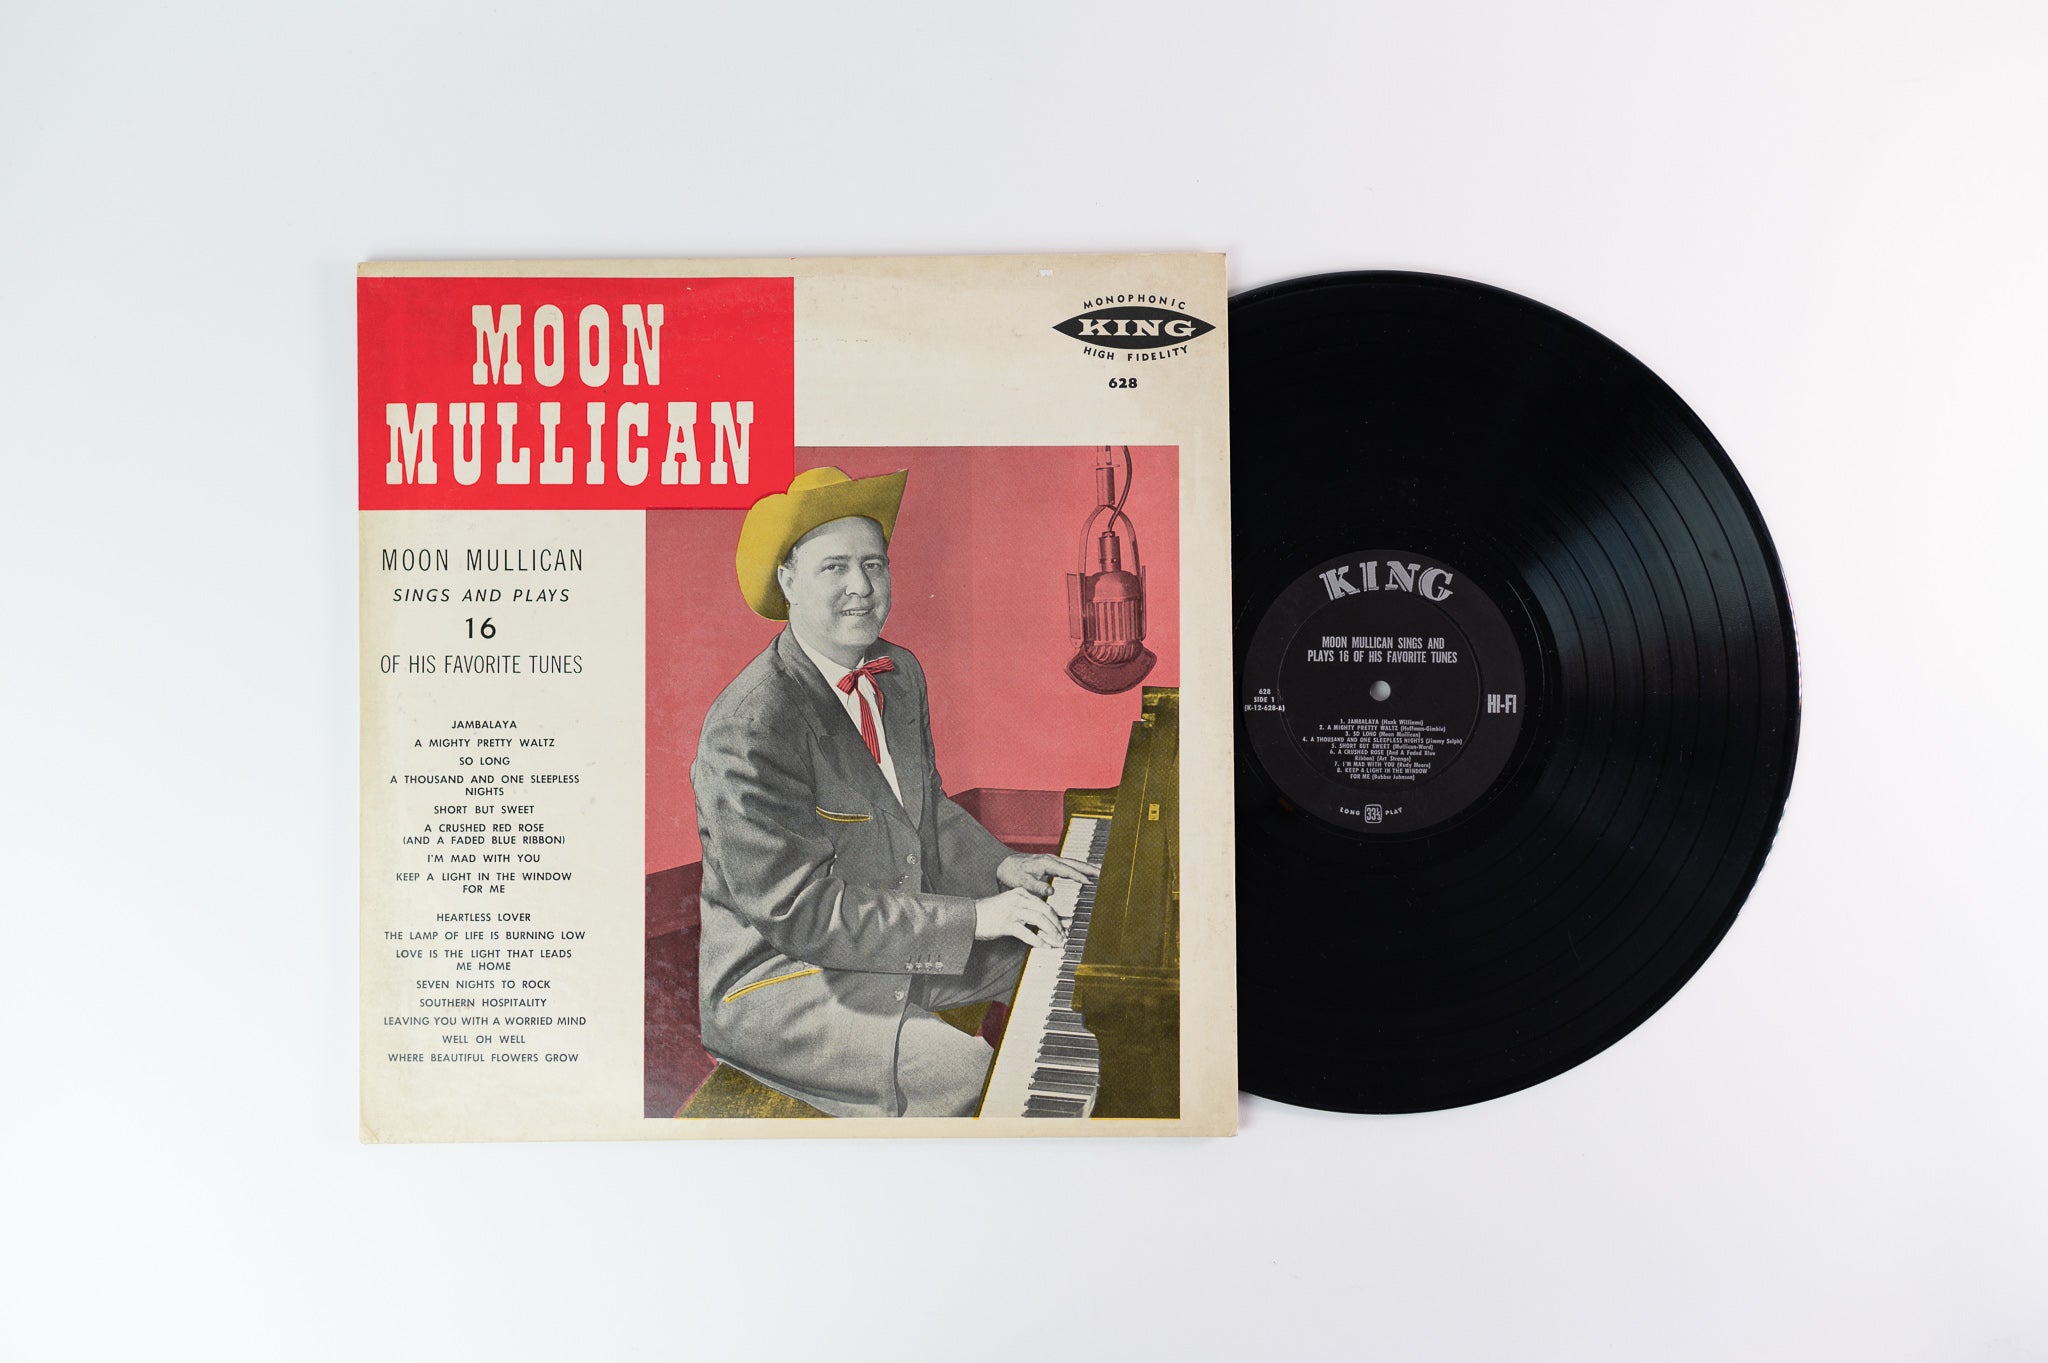 Moon Mullican - Moon Mullican Sings And Plays 16 Of His Favorite Tunes on King